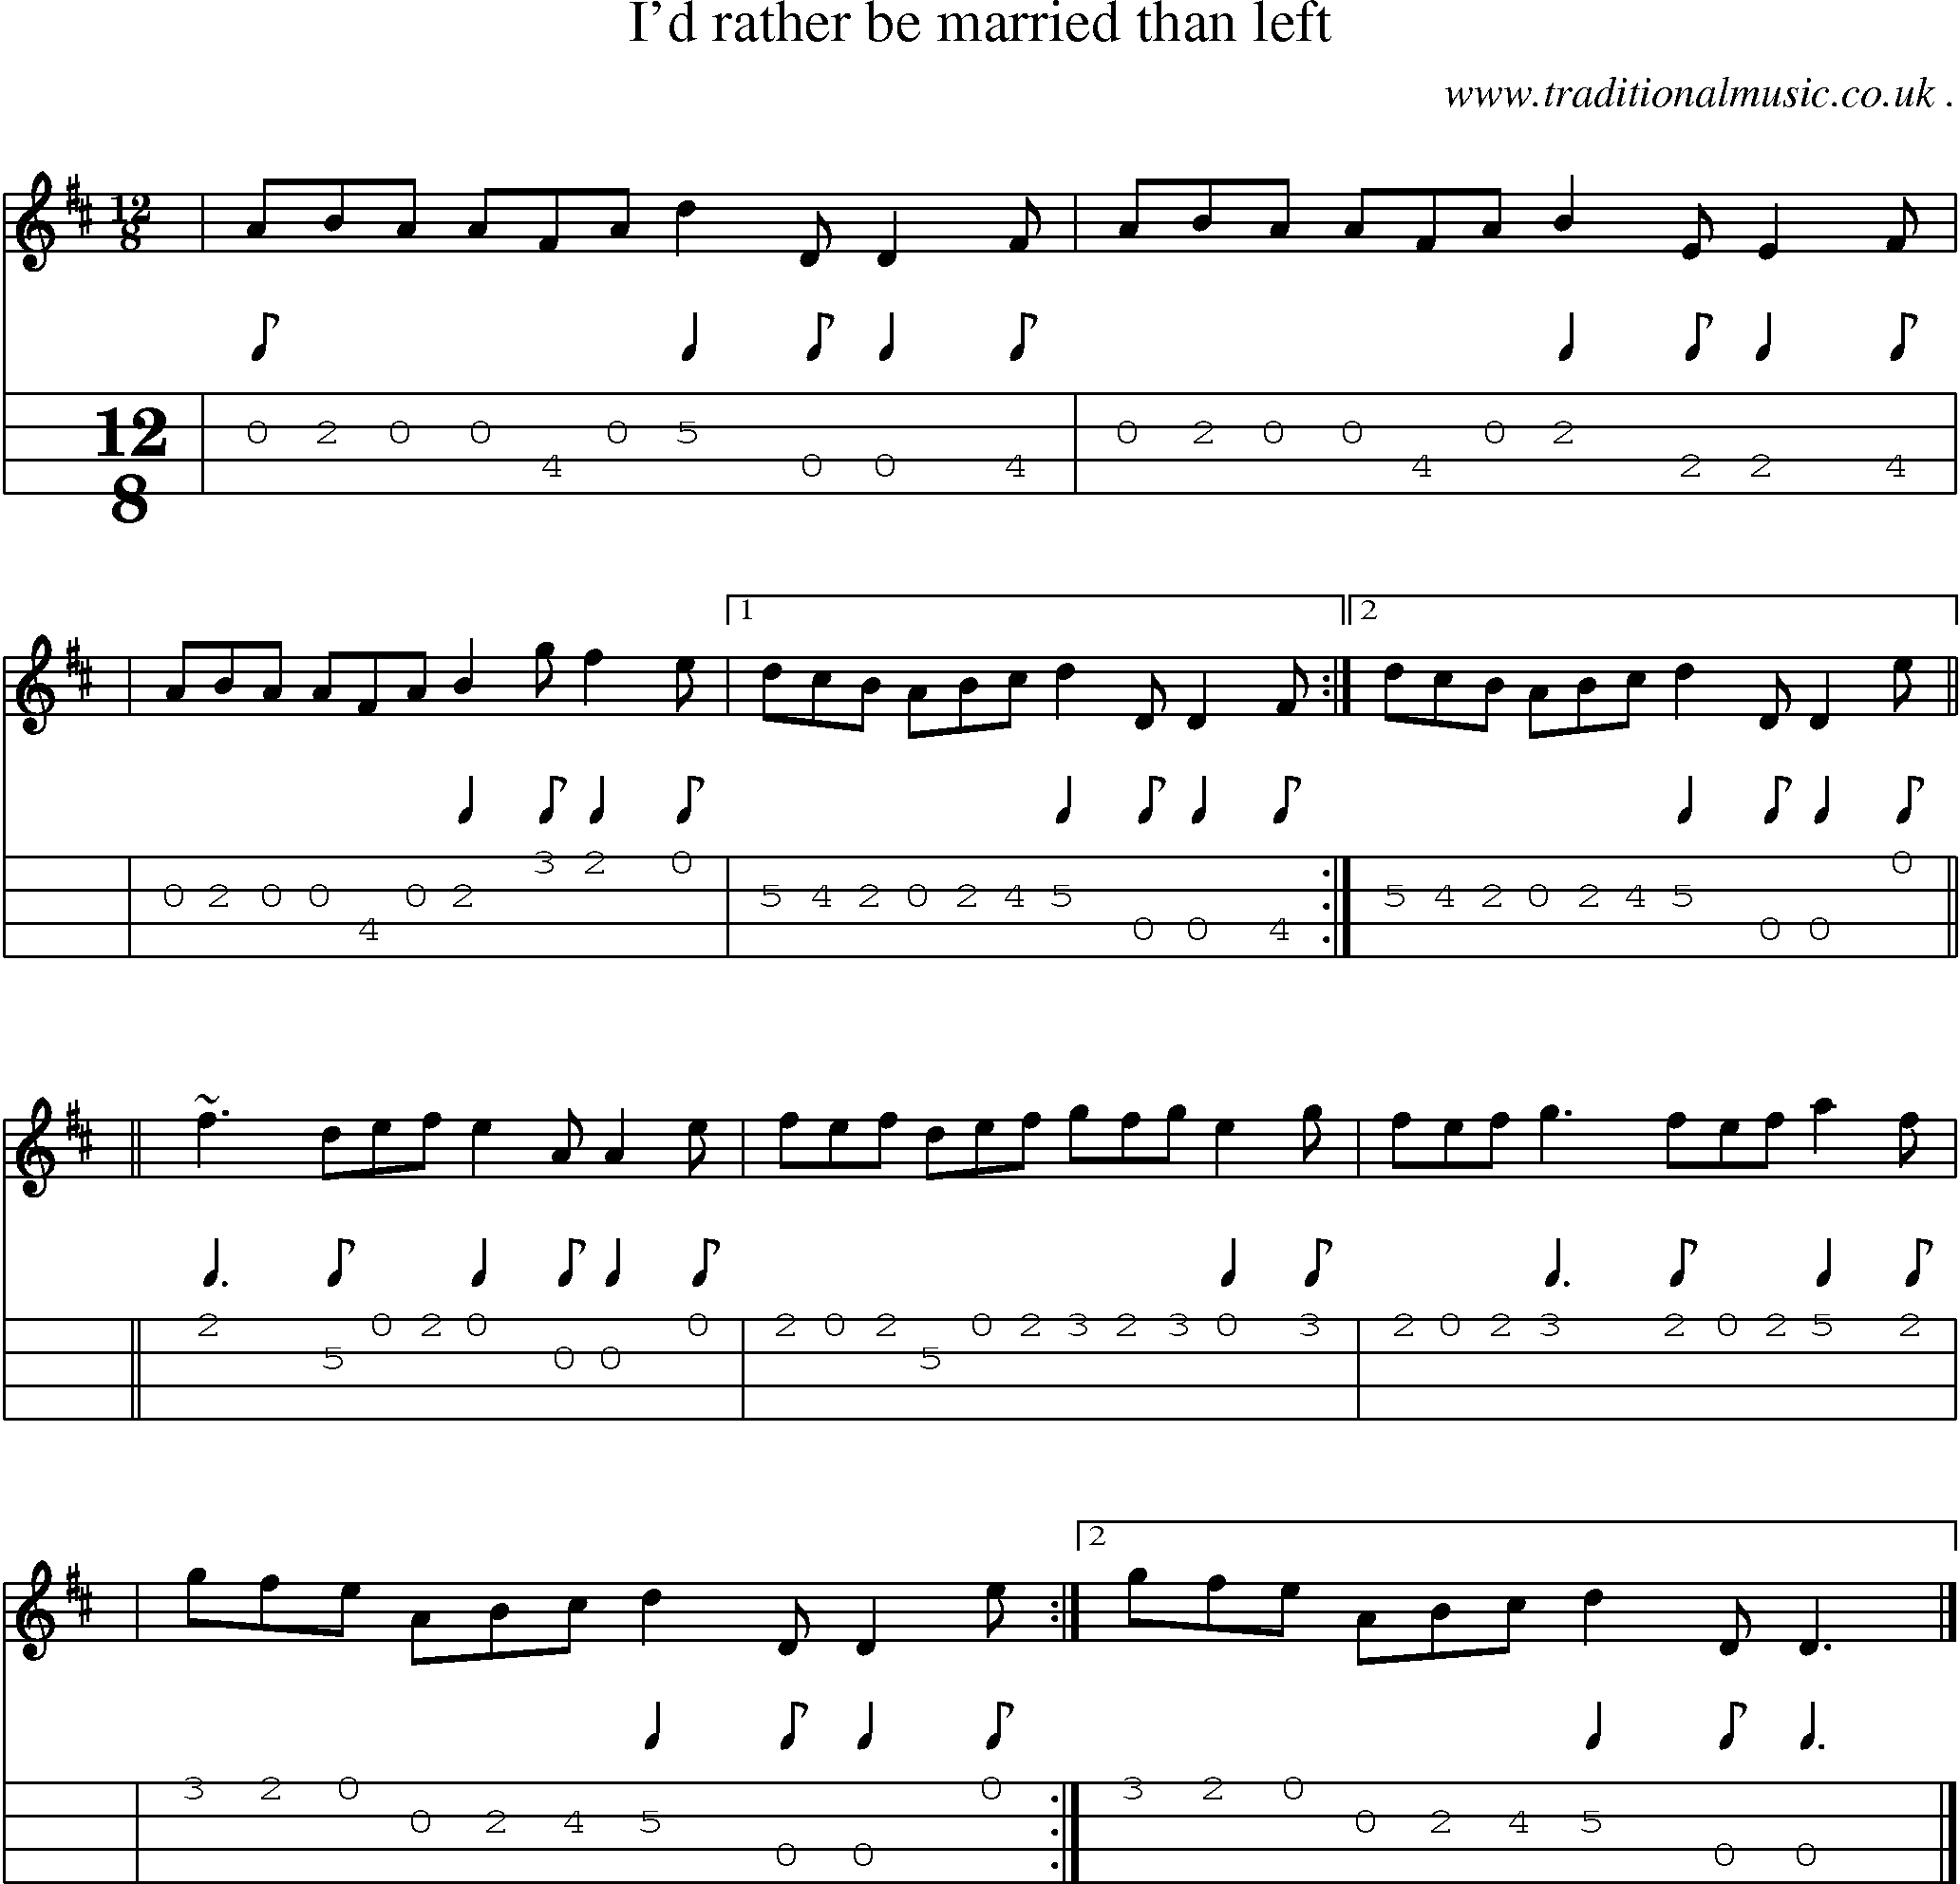 Sheet-music  score, Chords and Mandolin Tabs for Id Rather Be Married Than Left